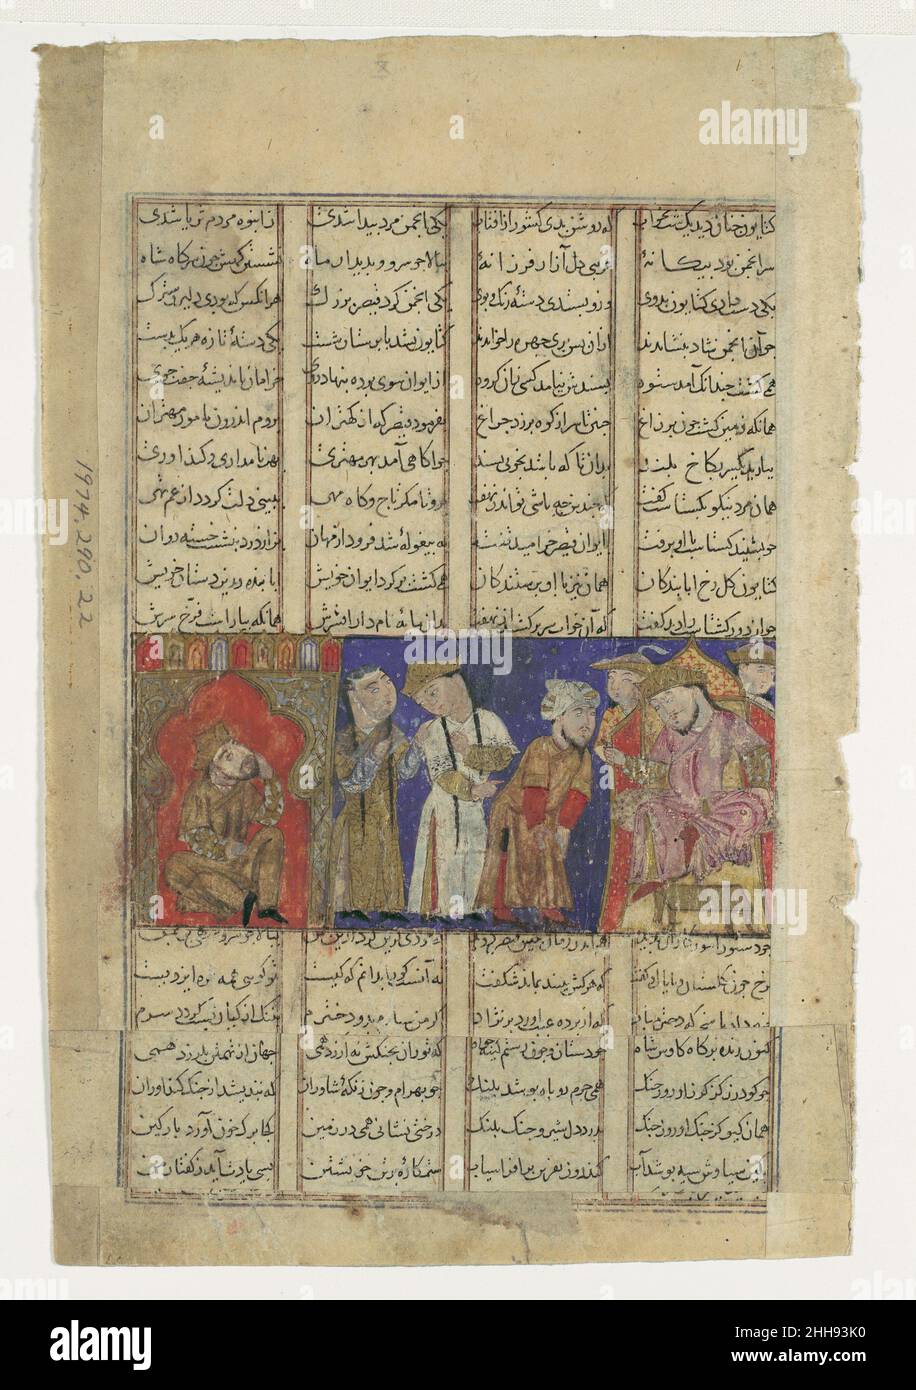 Caesar Gives his Daughter Katayun to Gushtasp", Folio from a Shahnama (Book  of Kings) of Firdausi ca. 1330–40 Abu'l Qasim Firdausi In the court of Rum  (the Roman Empire) it was customary